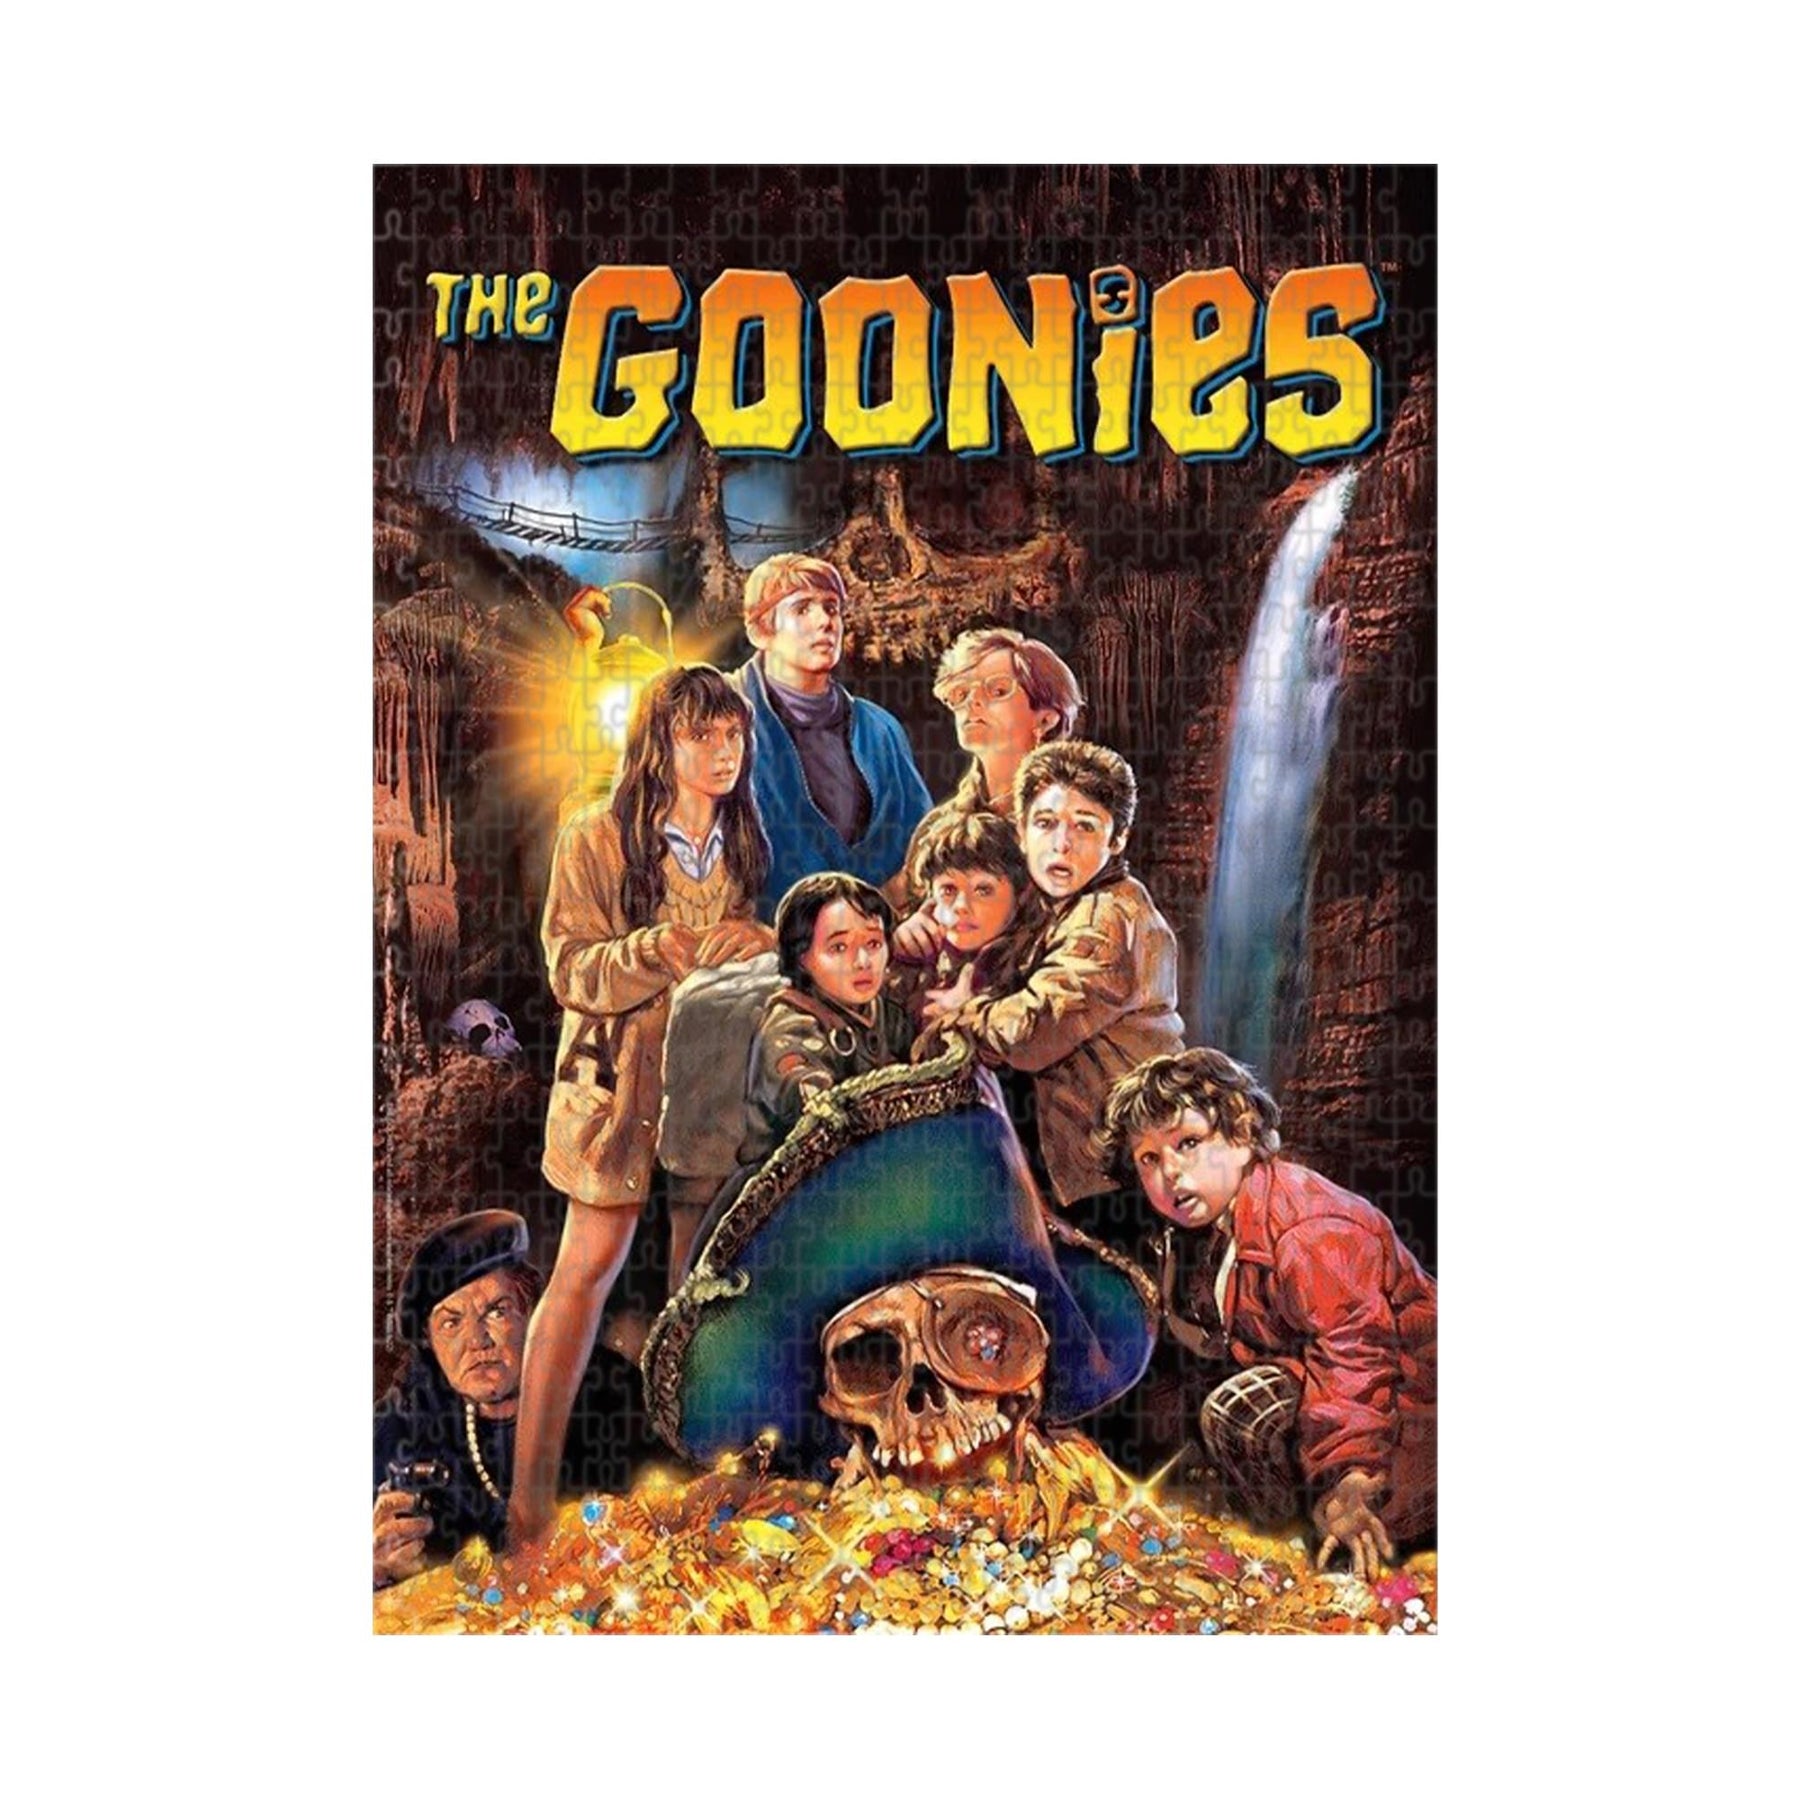 The Goonies Movie Poster 500 Piece Jigsaw Puzzle